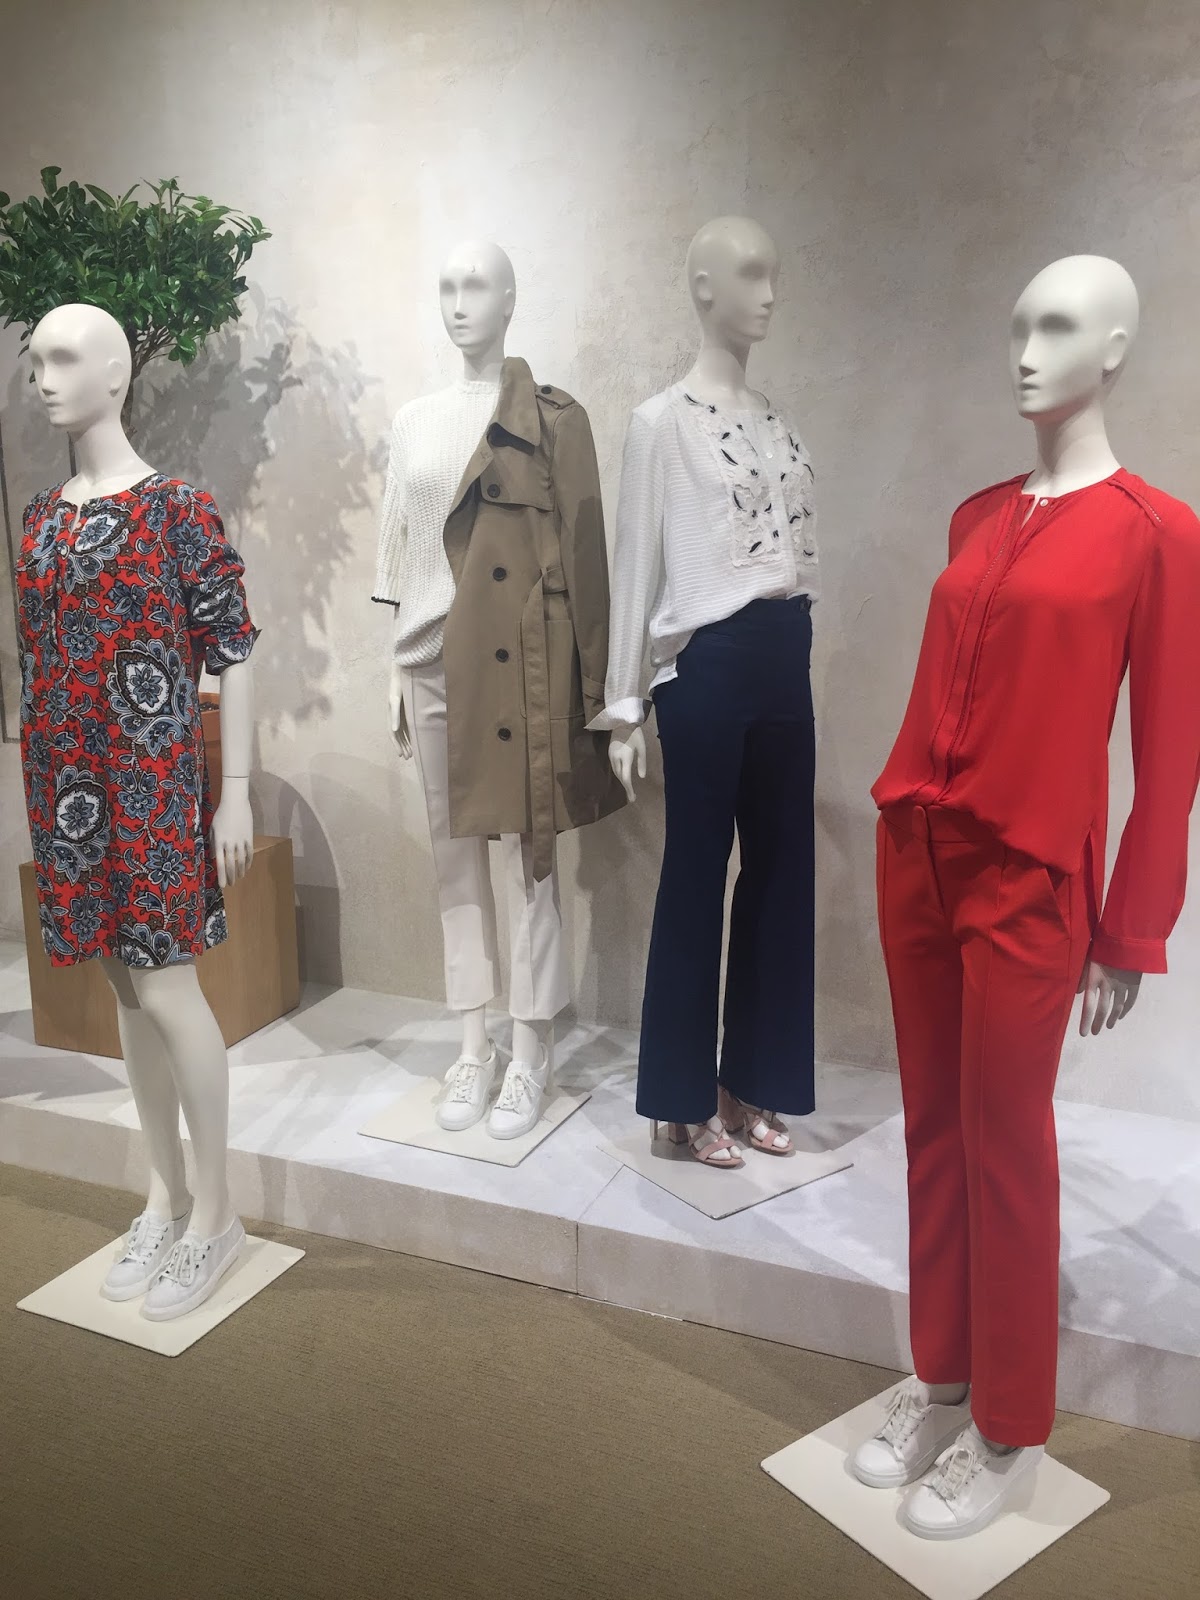 FIRST LOOK: LOFT / Lou & Grey Spring 2016 - NYC Recessionista